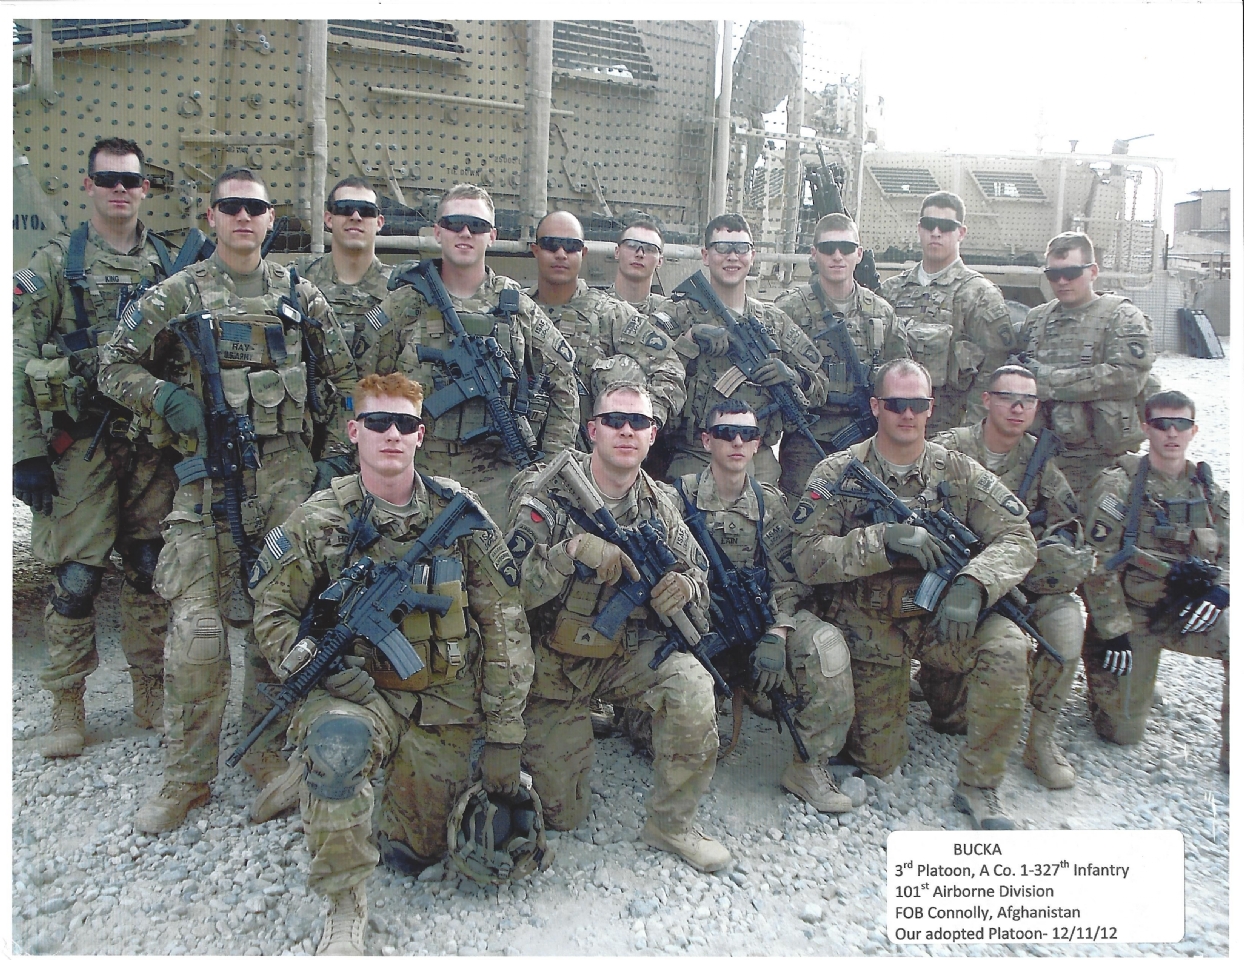 Afghanistan Platoon 2012
BUCKA
3rd Platoon, A Co. 1-327th Infantry
101st Airborne Division
FOB Connolly, Afghanistan
Our adopted Platoon - 12/11/12
